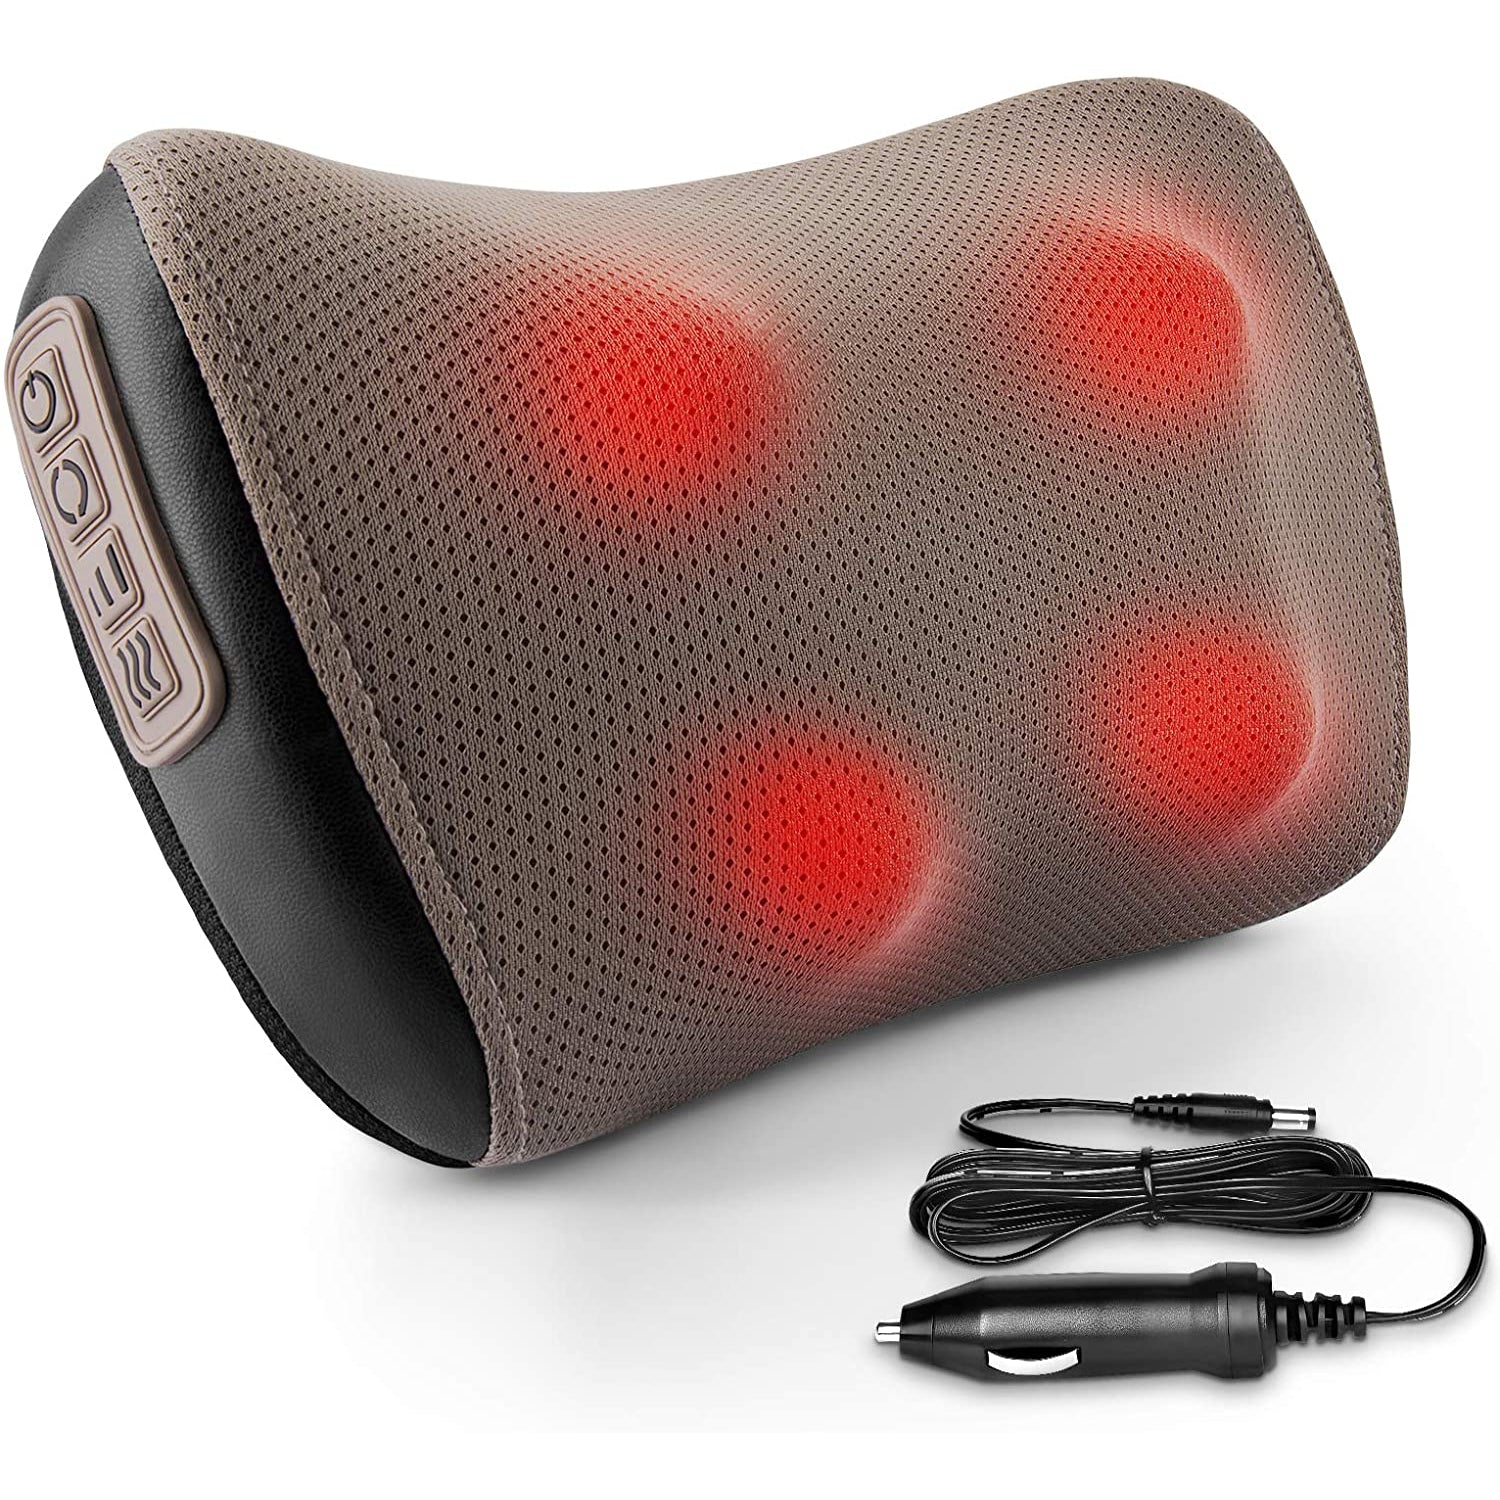 Tawak Neck and Back Massager with Heat Function